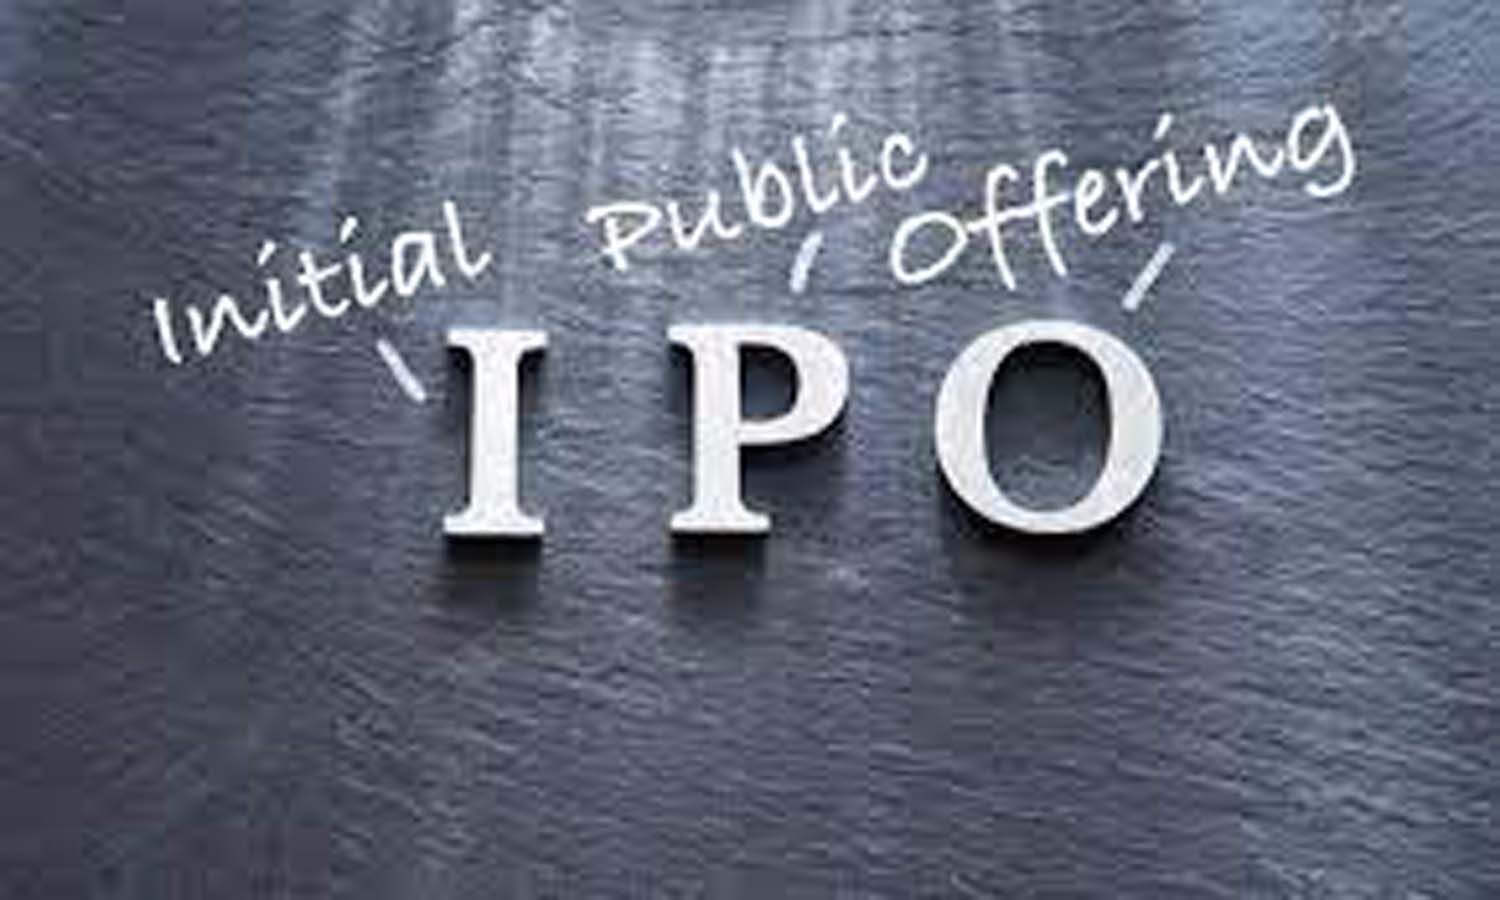 Kanpur News: Kanpur-based Lohia Corp Ltd files DRHP for IPO